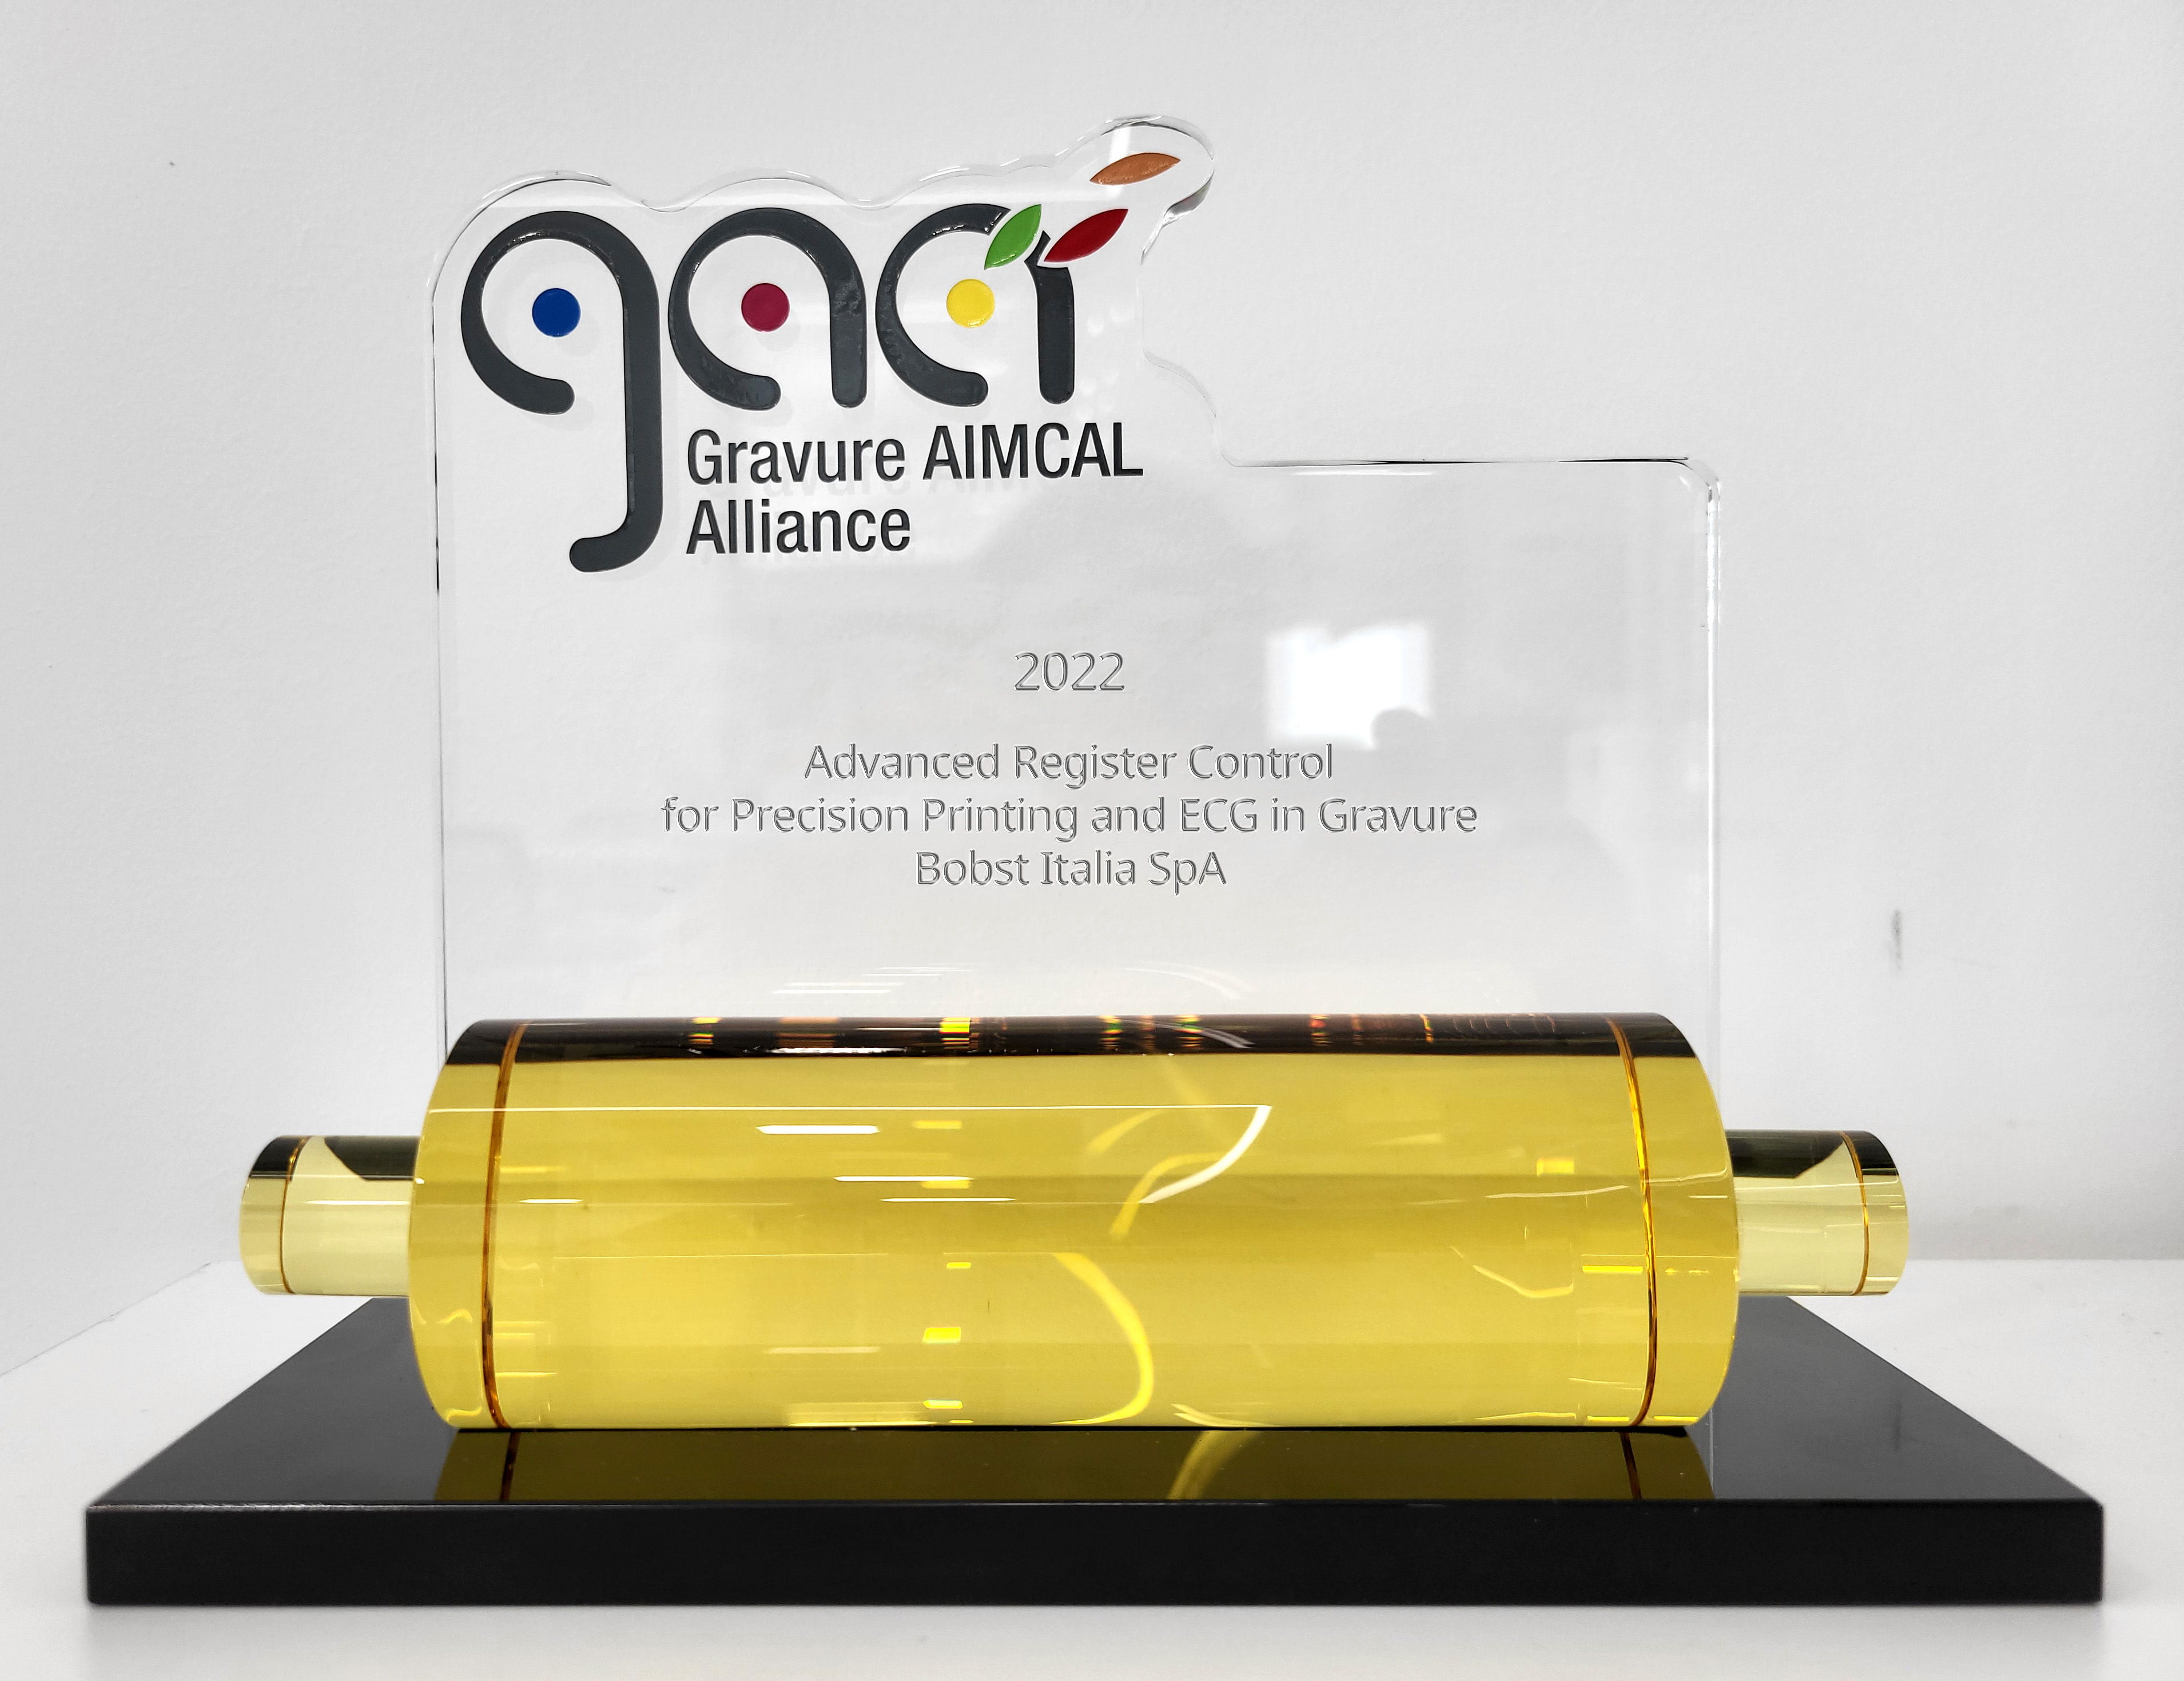 The 2022 Golden Cylinder award by the Gravure AIMCAL Alliance presented to BOBST for its Advanced Register Control for Precision Printing and ECG in Gravure, winner in the Technical Innovation (Press) category.